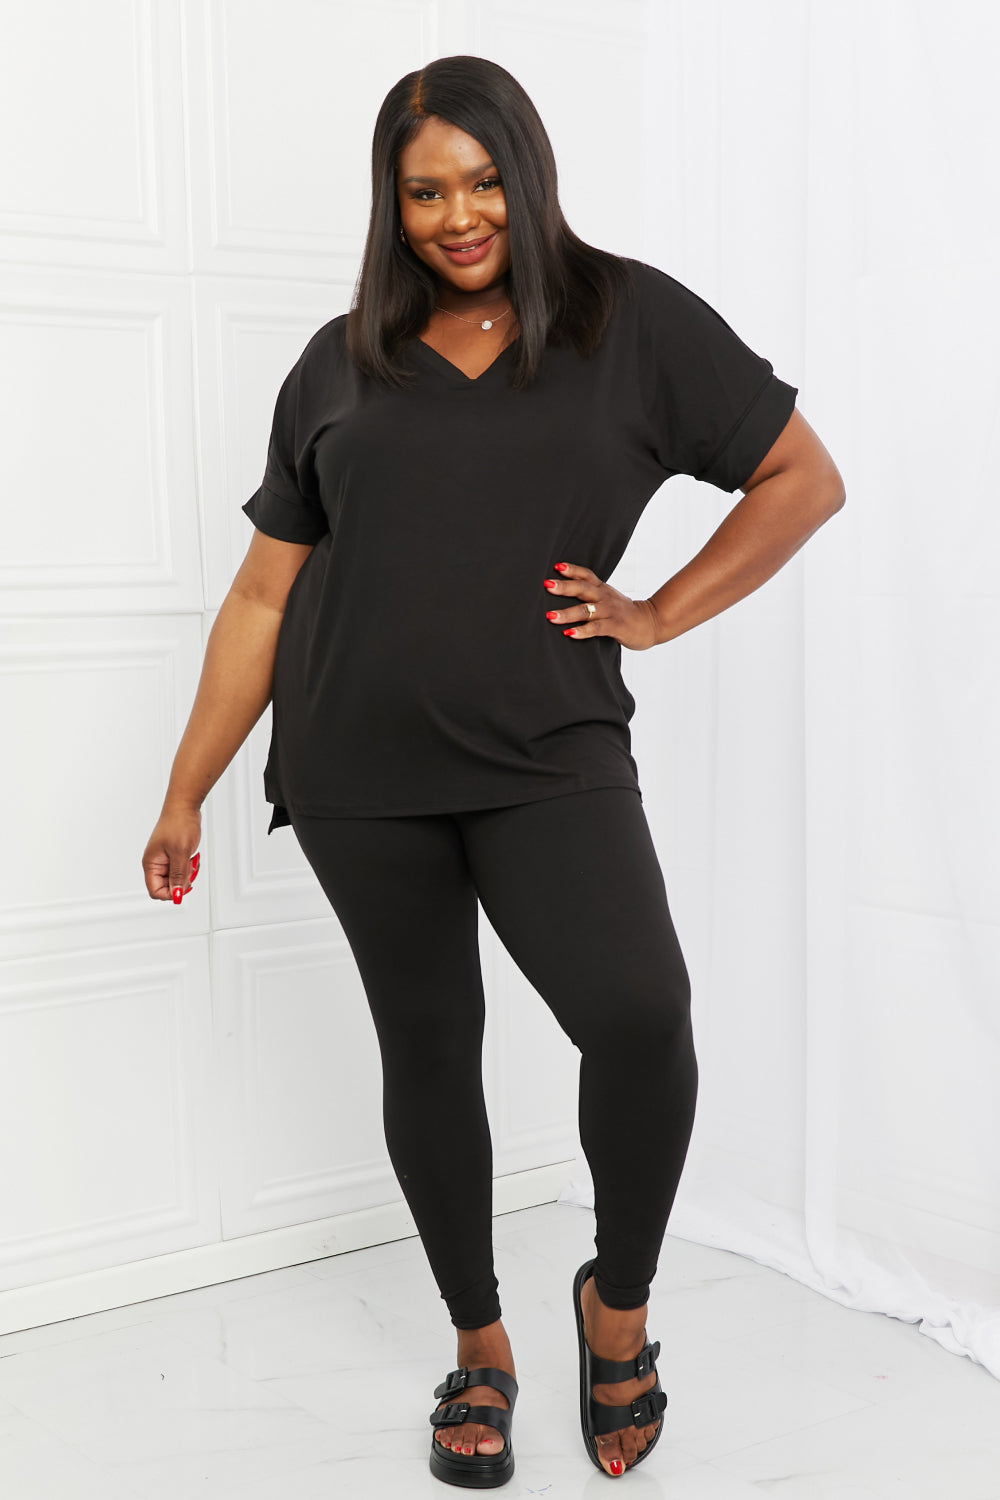 BLACK - Zenana Self Love Full Size Brushed DTY Microfiber Lounge Set in Black - Ships from The USA - womens pants set at TFC&H Co.